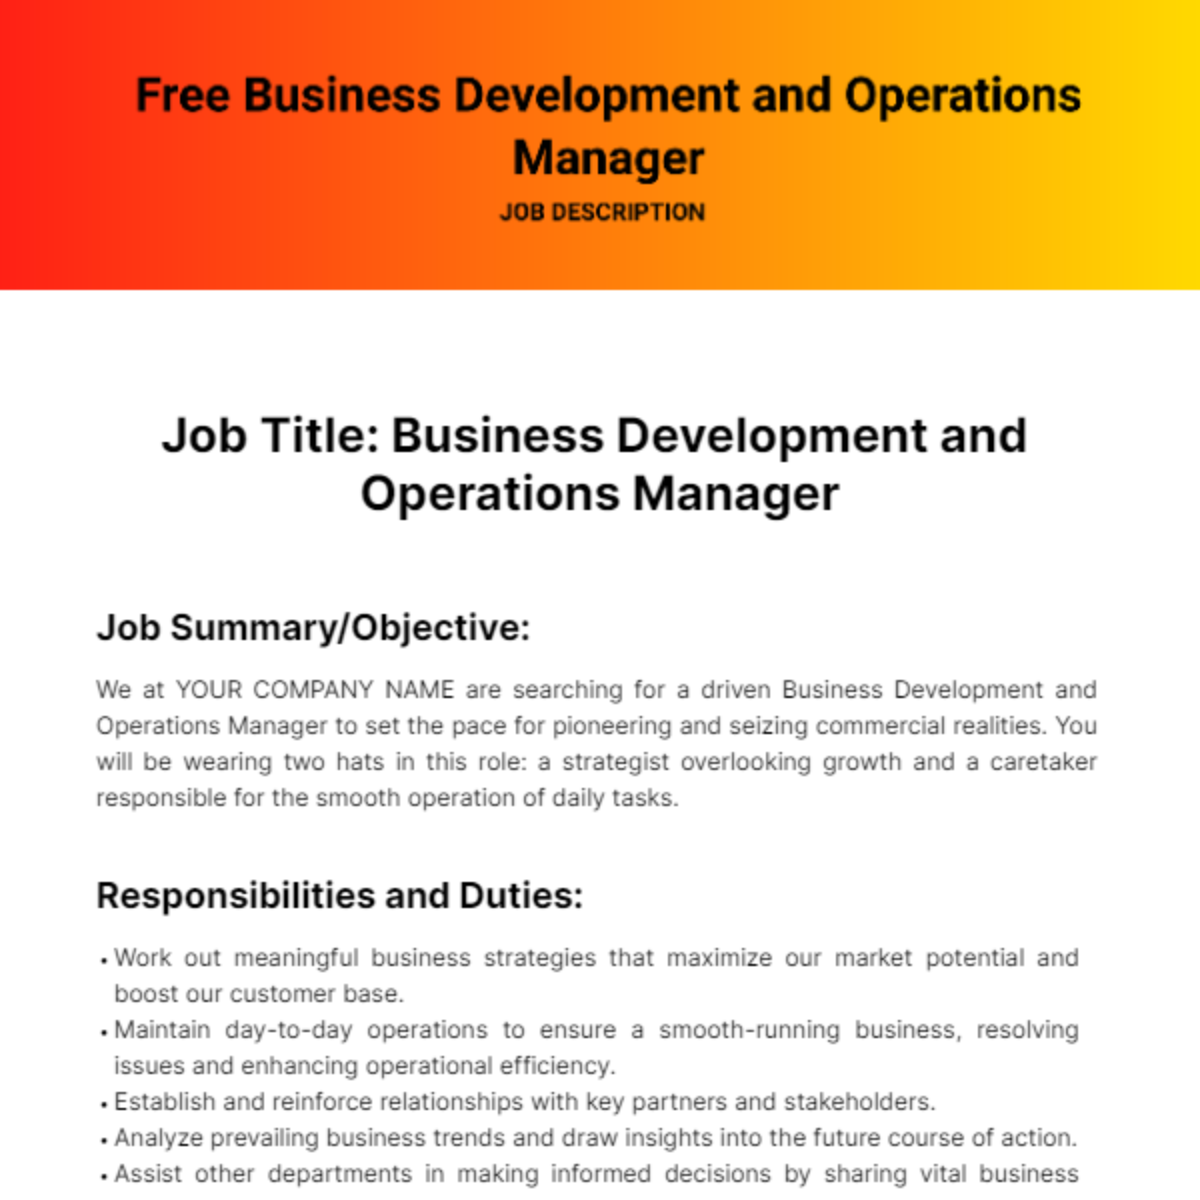 Free Business Development and Operations Manager Job Description Template